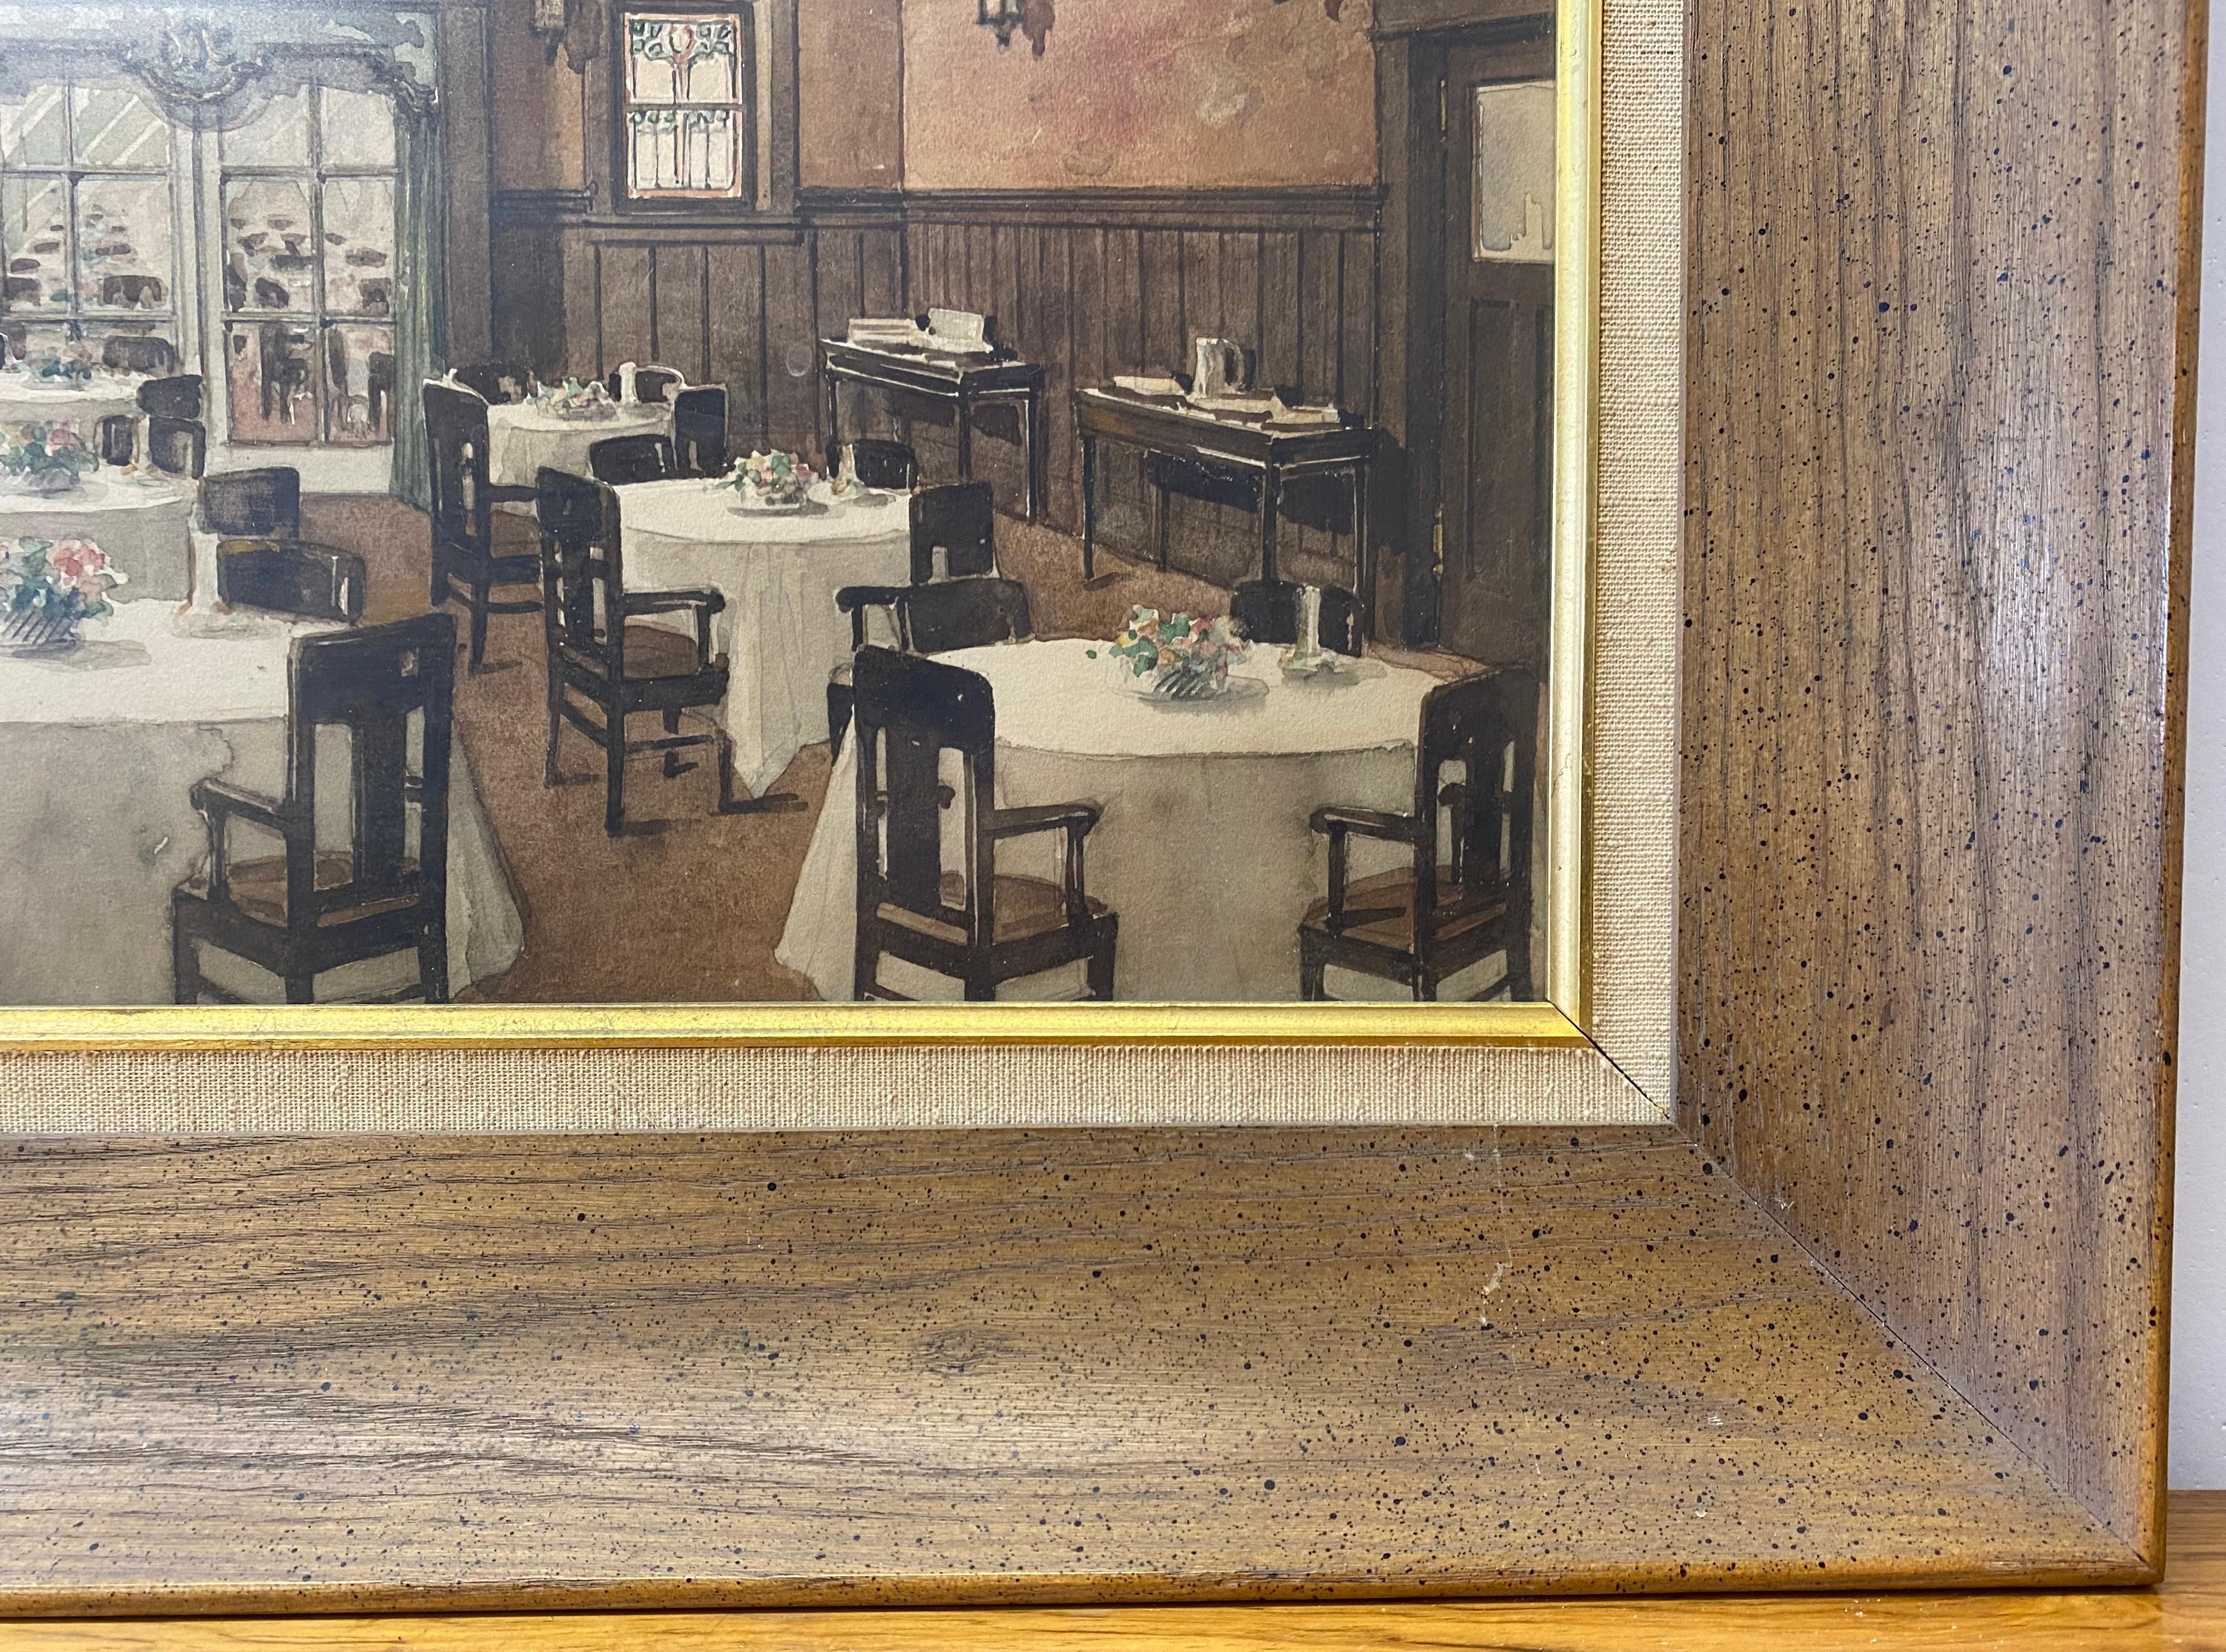 Exceptional Lodge Dining Room Interior Original Watercolor Early 20th C. - Impressionist Painting by Unknown